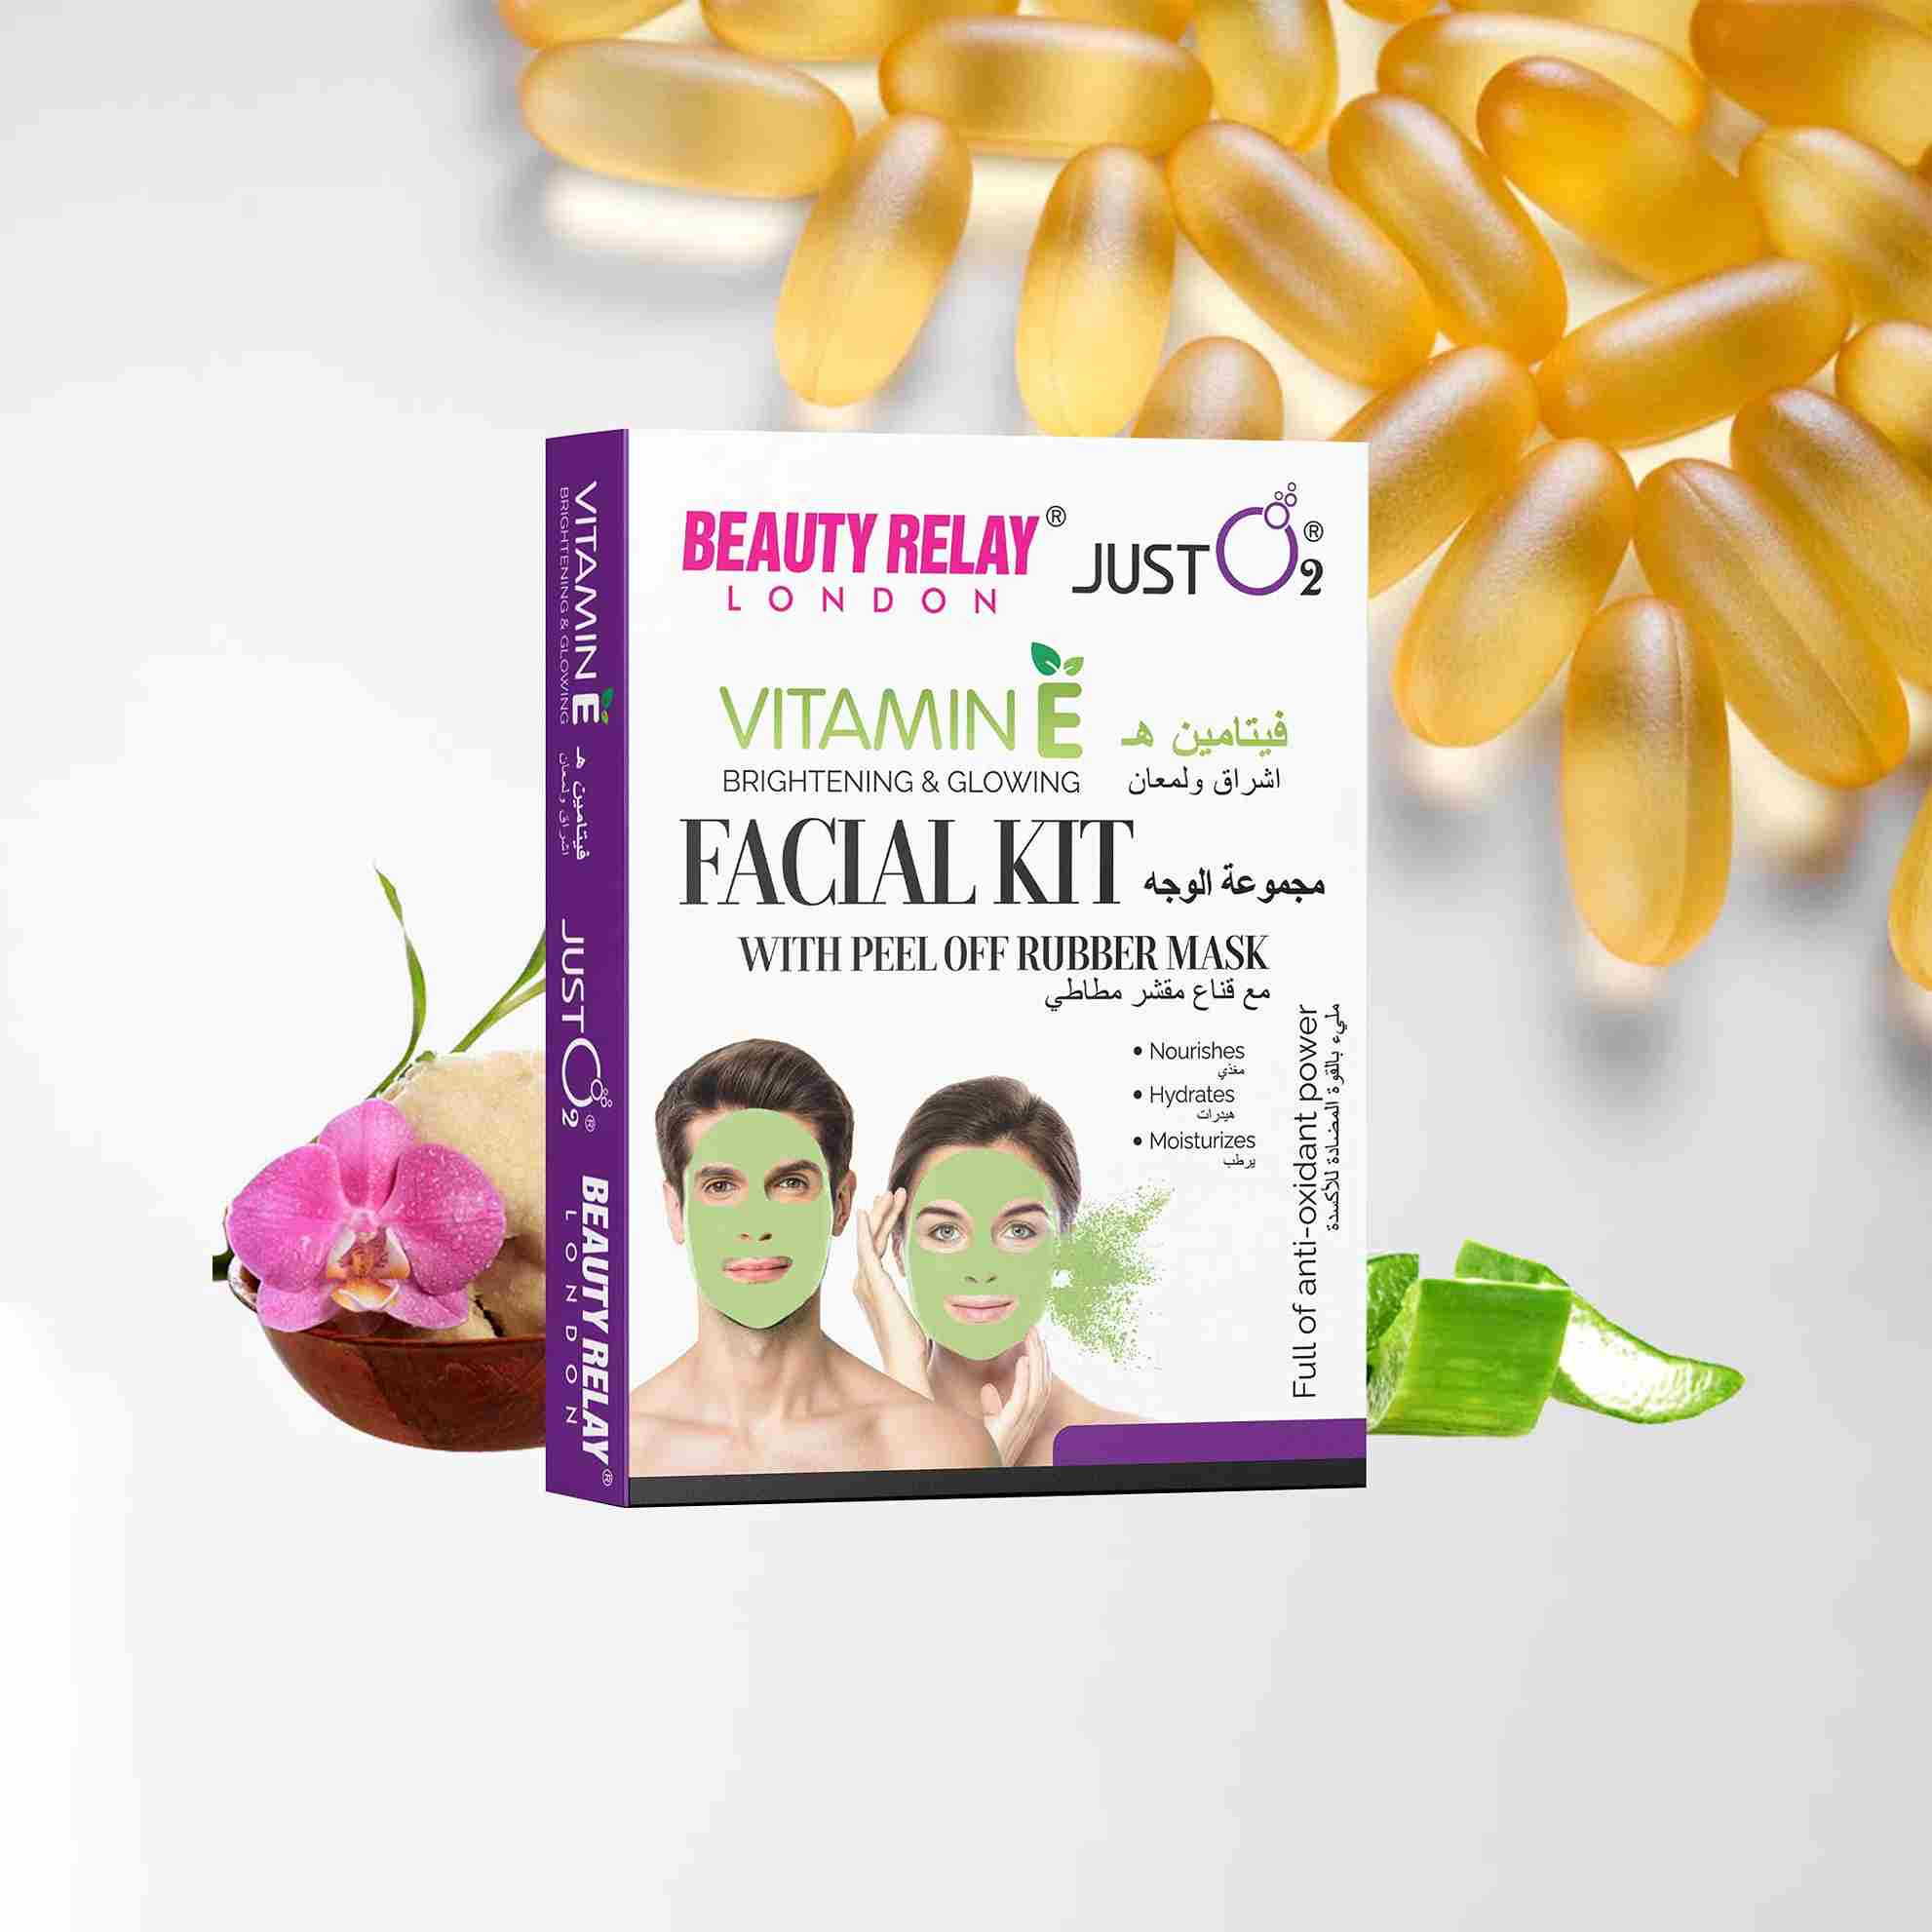 Beauty Relay London Vitamin E Brightening & Glowing Facial Kit With Peel Off Rubber Mask